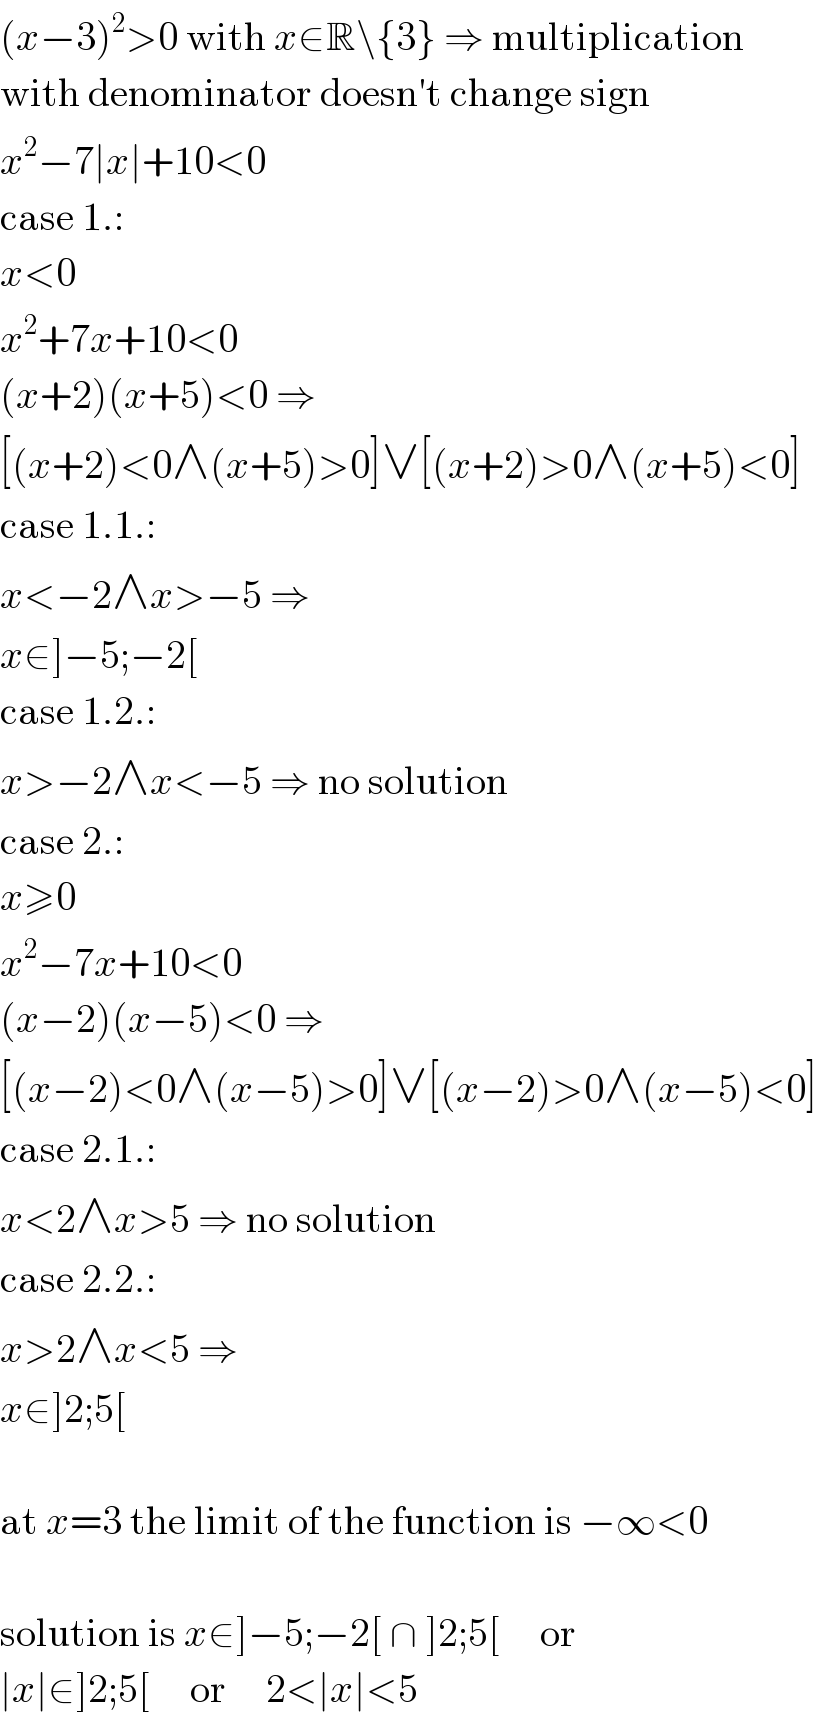 (x−3)^2 >0 with x∈R\{3} ⇒ multiplication  with denominator doesn′t change sign  x^2 −7∣x∣+10<0  case 1.:  x<0  x^2 +7x+10<0  (x+2)(x+5)<0 ⇒  [(x+2)<0∧(x+5)>0]∨[(x+2)>0∧(x+5)<0]  case 1.1.:  x<−2∧x>−5 ⇒  x∈]−5;−2[  case 1.2.:  x>−2∧x<−5 ⇒ no solution  case 2.:  x≥0  x^2 −7x+10<0  (x−2)(x−5)<0 ⇒  [(x−2)<0∧(x−5)>0]∨[(x−2)>0∧(x−5)<0]  case 2.1.:  x<2∧x>5 ⇒ no solution  case 2.2.:  x>2∧x<5 ⇒  x∈]2;5[    at x=3 the limit of the function is −∞<0    solution is x∈]−5;−2[ ∩ ]2;5[     or  ∣x∣∈]2;5[     or     2<∣x∣<5  